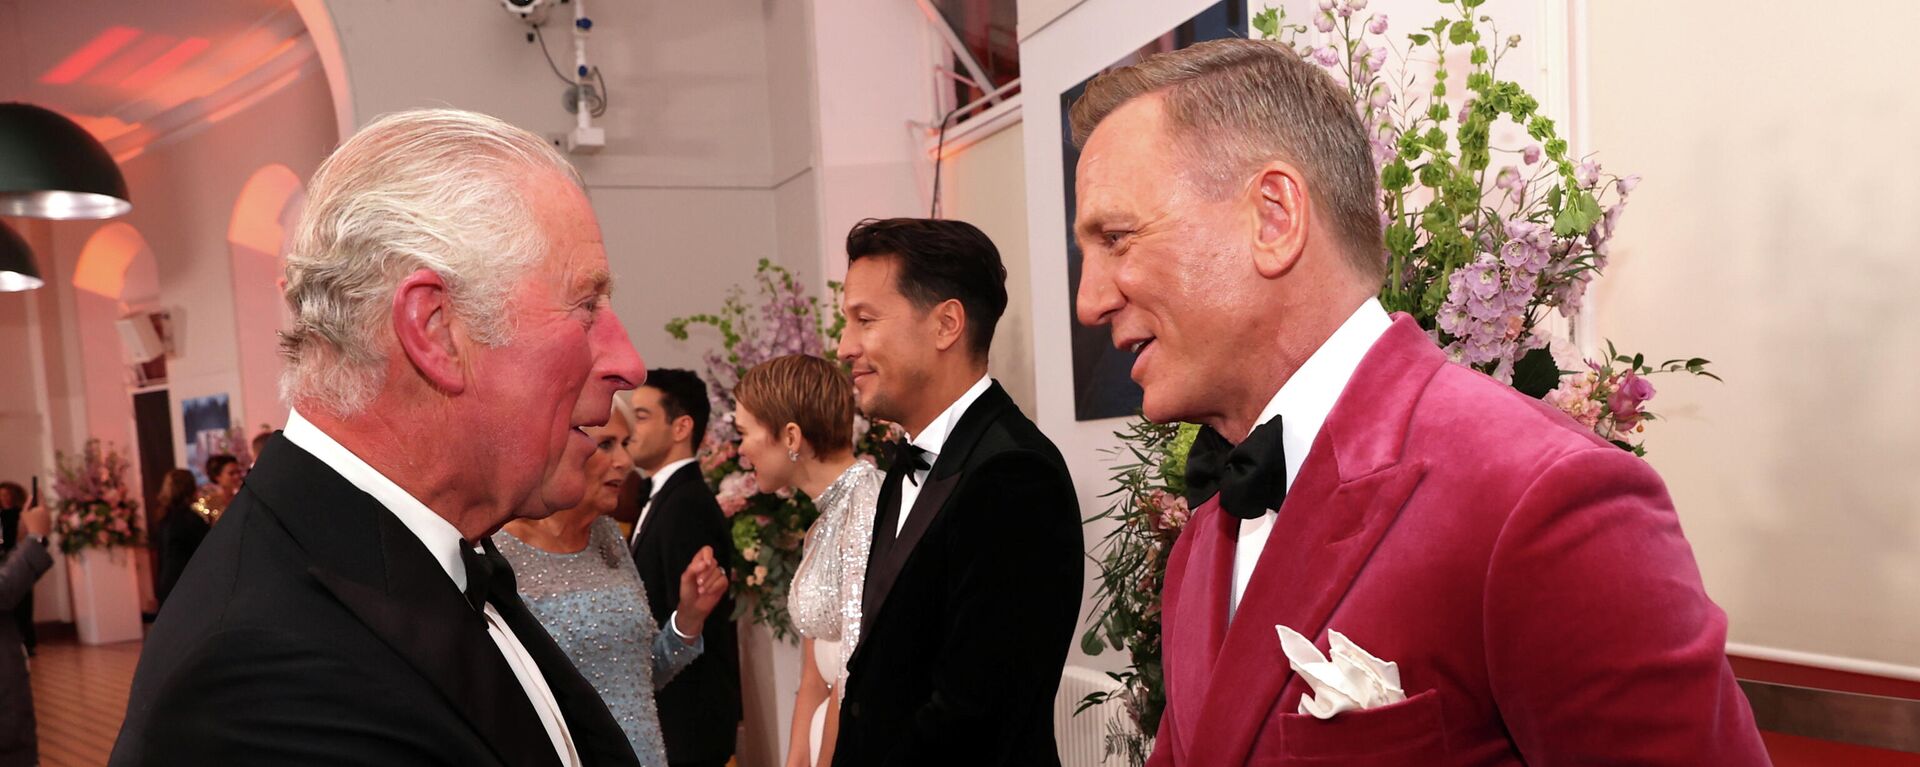 Britain's Prince Charles speaks with actor Daniel Craig at the world premiere of the new James Bond film No Time To Die at the Royal Albert Hall in London, Britain, September 28, 2021. - Sputnik International, 1920, 29.09.2021